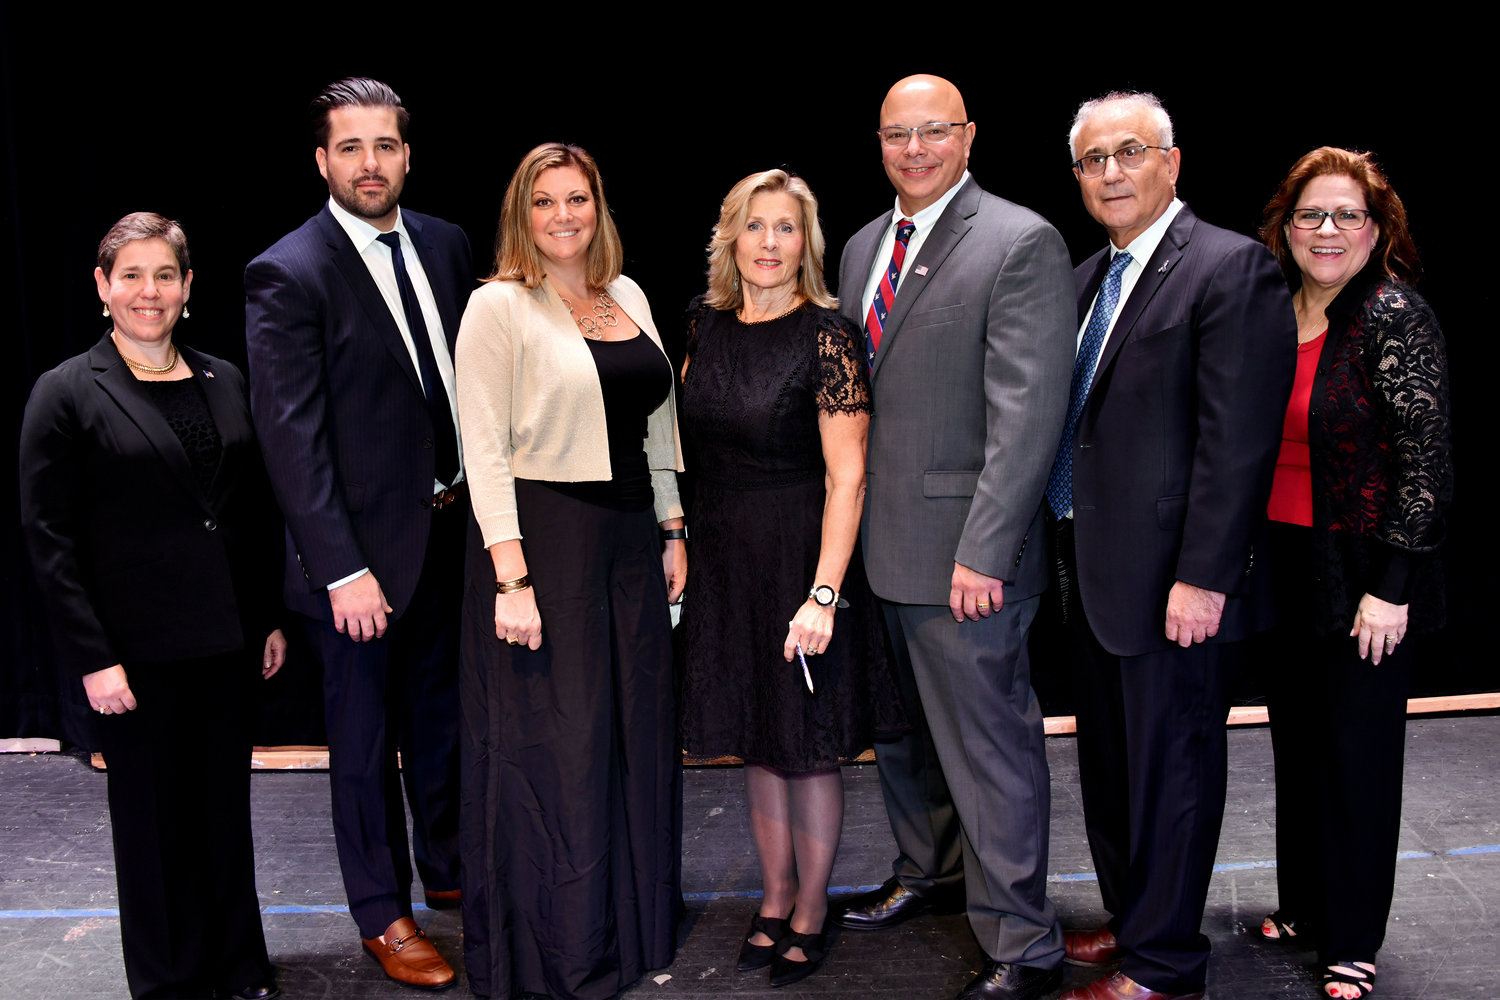 Marsha Silverman, far left, who is in her fifth year as a city councilwoman, works well with her colleagues, she said, including Kevin Maccarone, Danielle Fugazy Scagliola, Mayor Pam Panzenbeck, Jack Mancusi, Joseph Capobianco and Barbara Peebles.